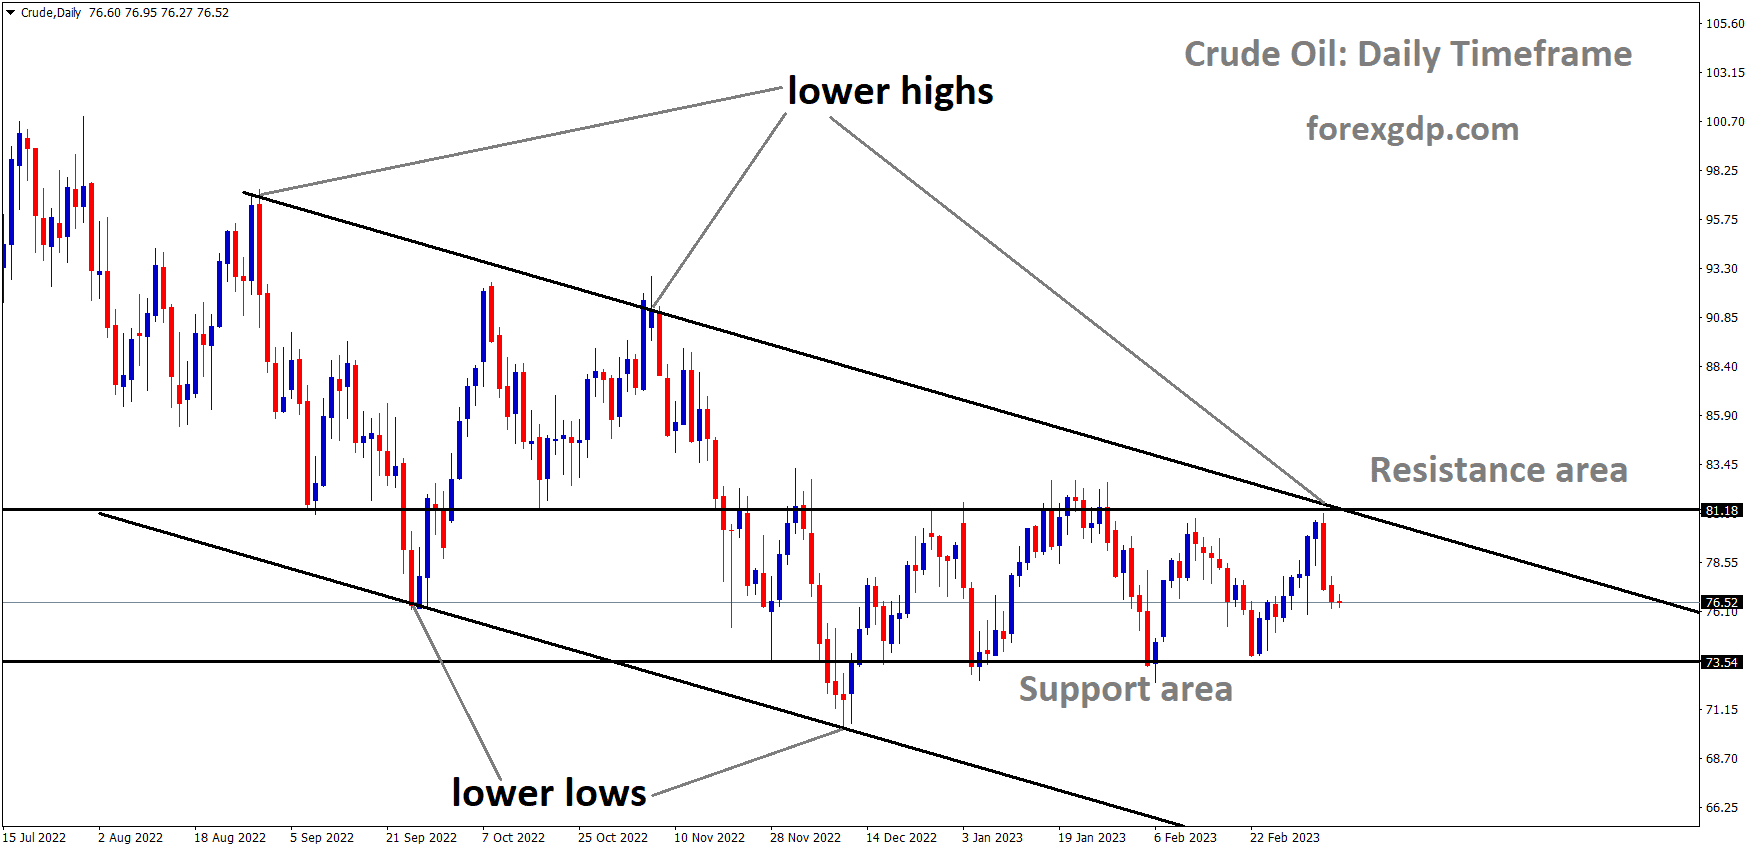 Crude oil price is moving in the Descending channel and the market has fallen from the lower high area of the channel